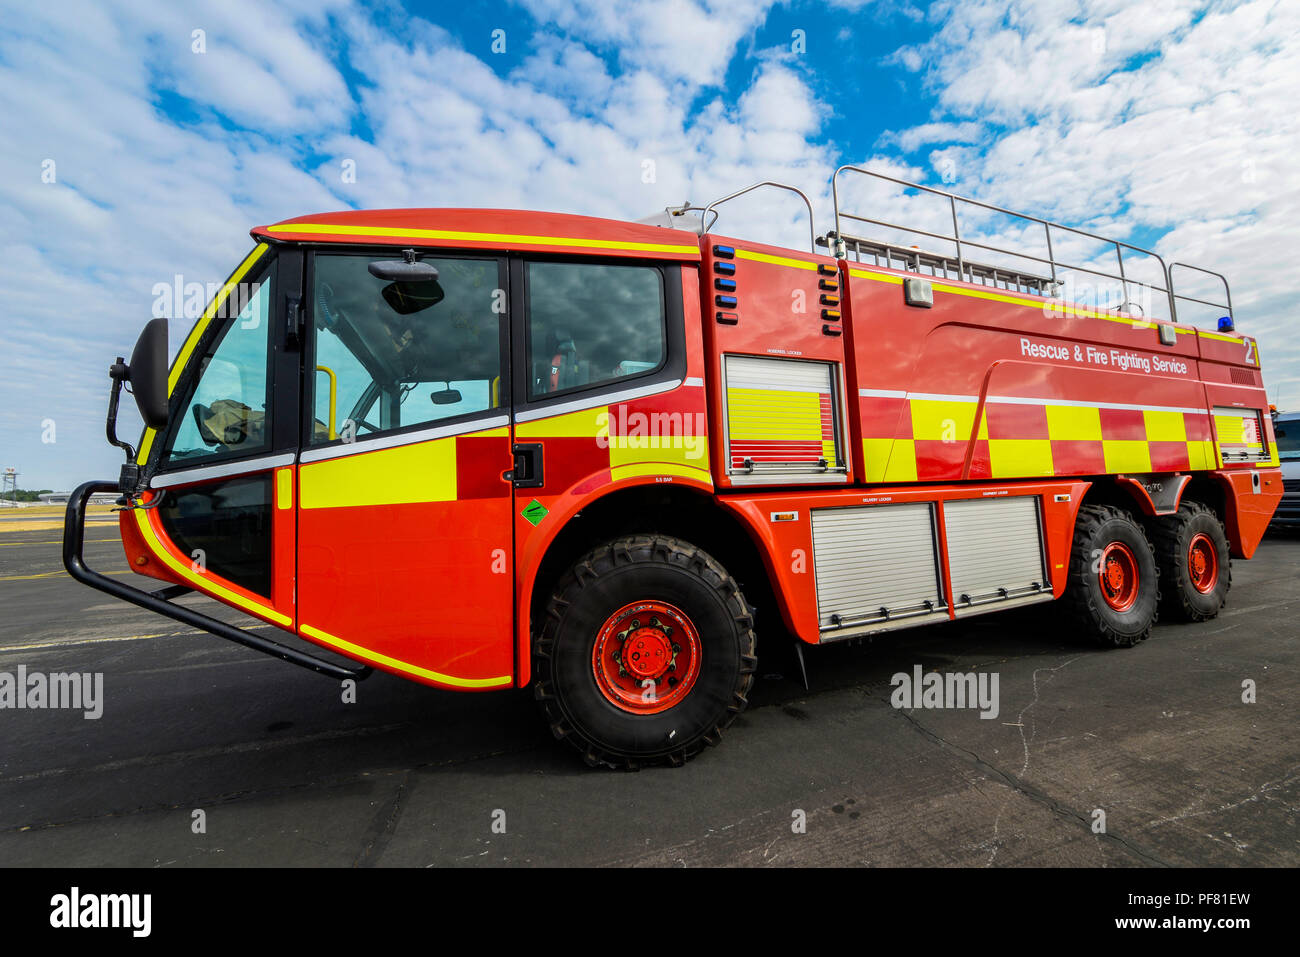 Fire engine at the Farnborough International Airshow FIA, aviation, aerospace trade show. Airport rescue & fire fighting service, emergency vehicle Stock Photo